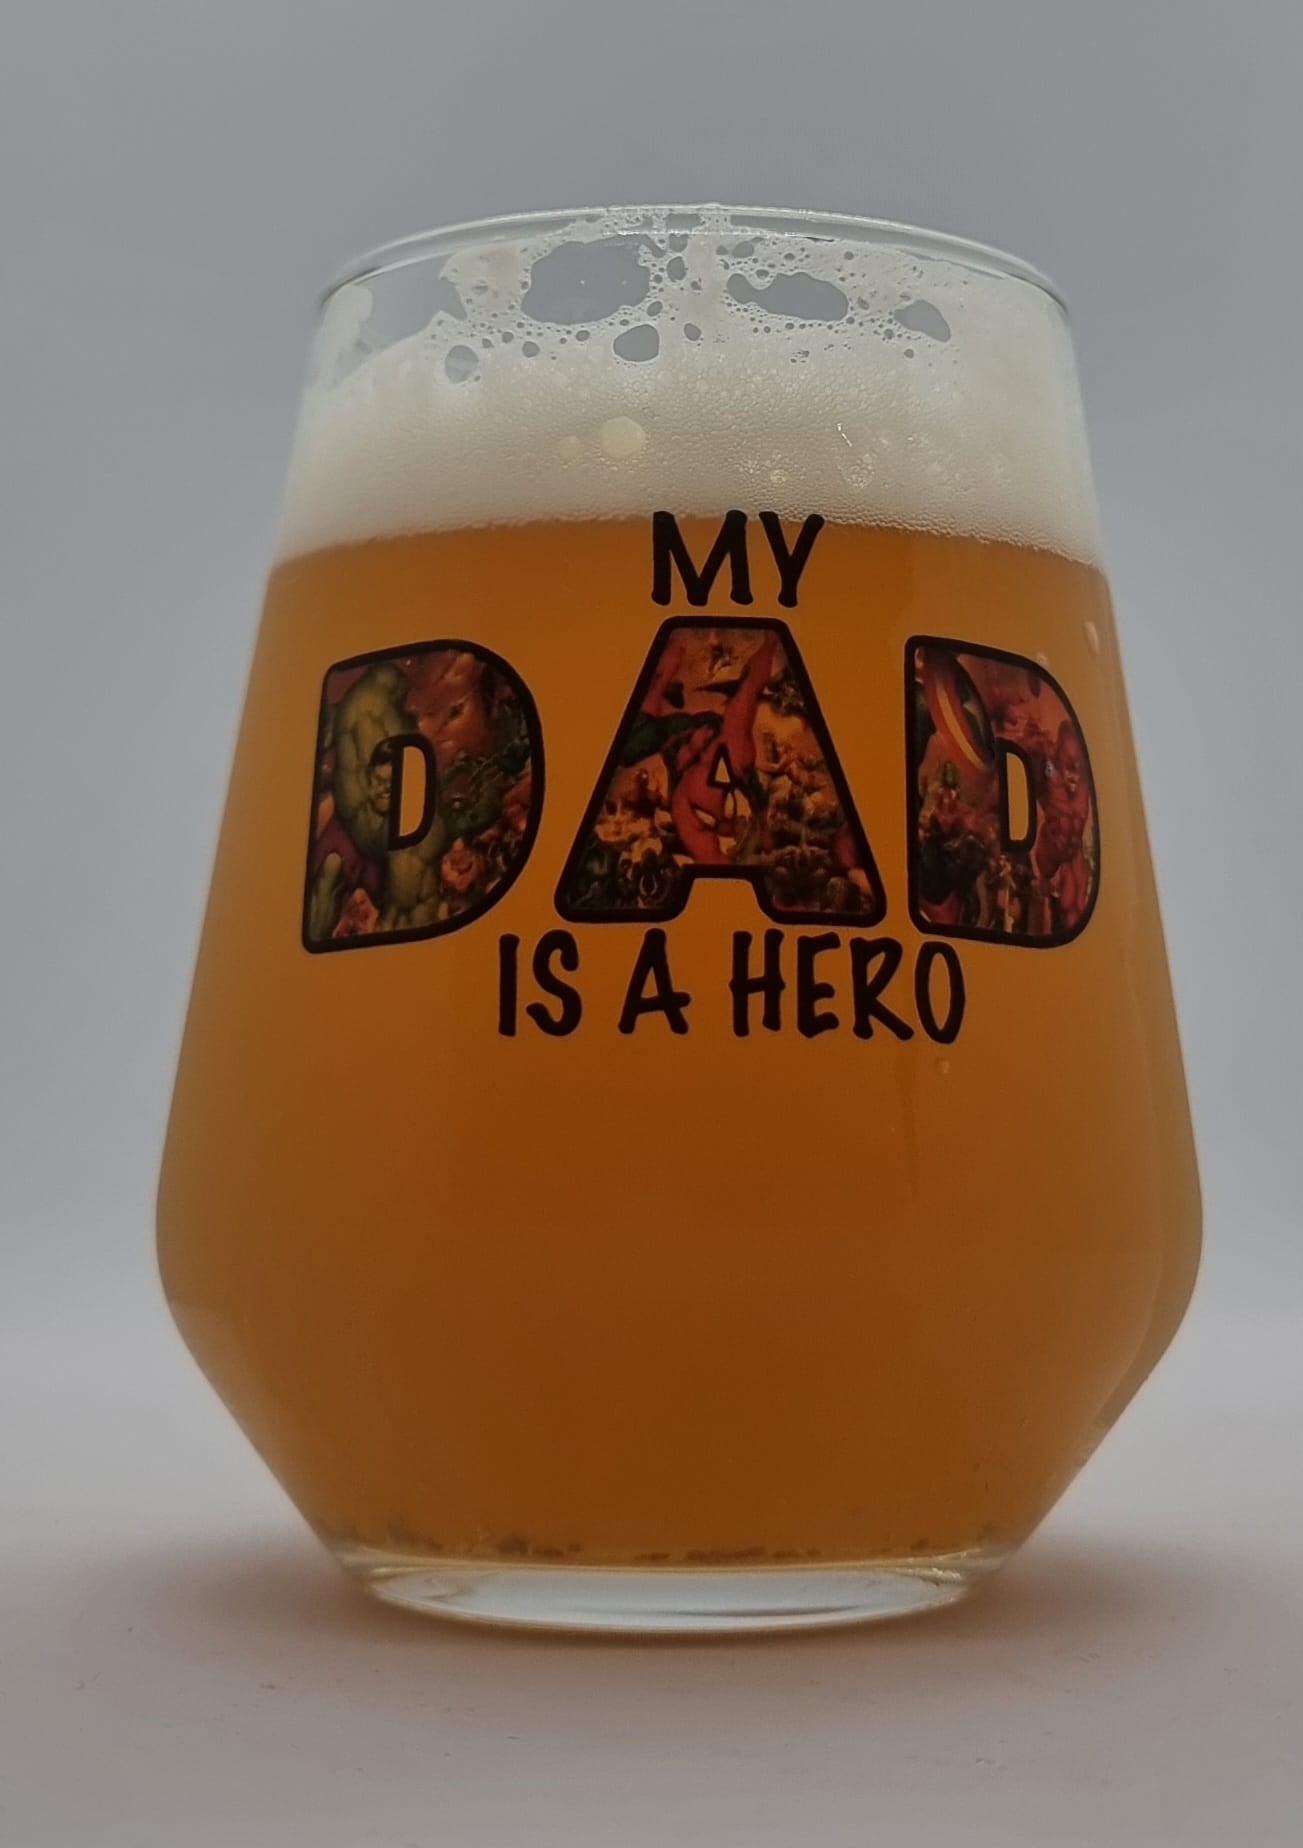 Dad Superhero Beer Glass: Iconic Characters, Marvel-inspired Design, Perfect Father's Day Gift